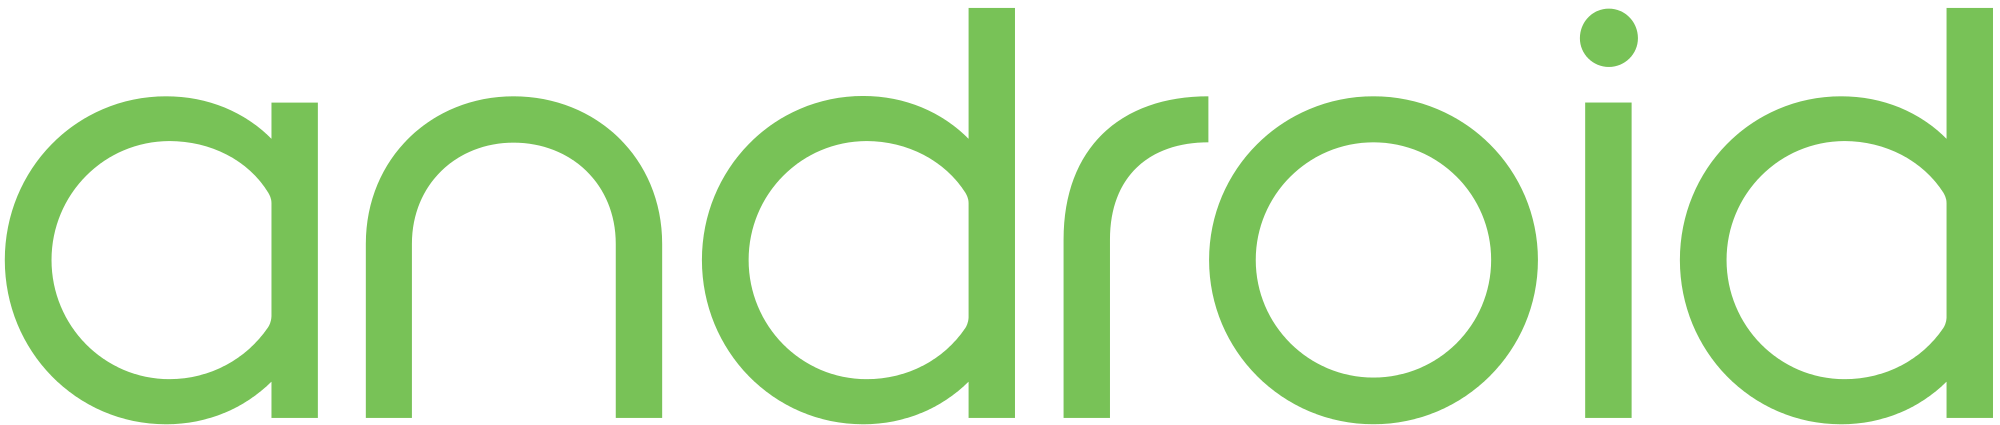 Android_logo_green.svg.png